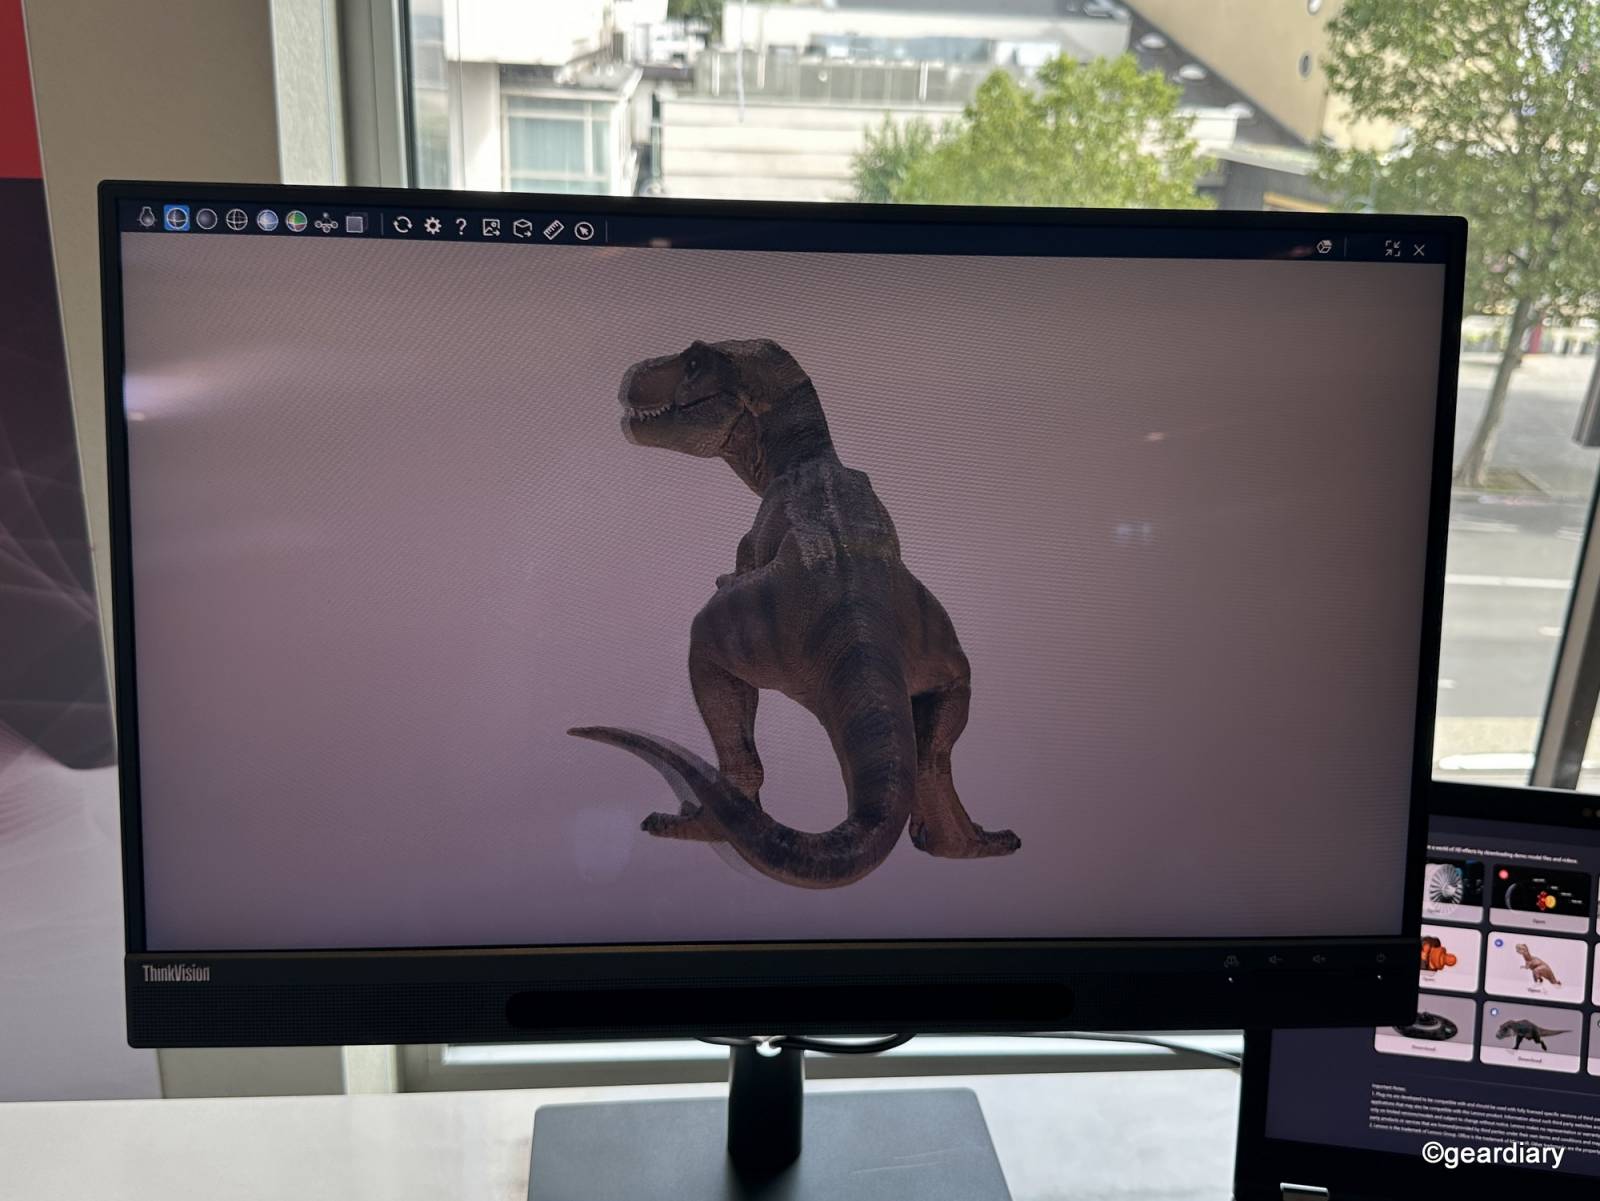 Lenovo ThinkVision 27 3D Monitor Brings Glasses-Free 3D; The Future Is Now!